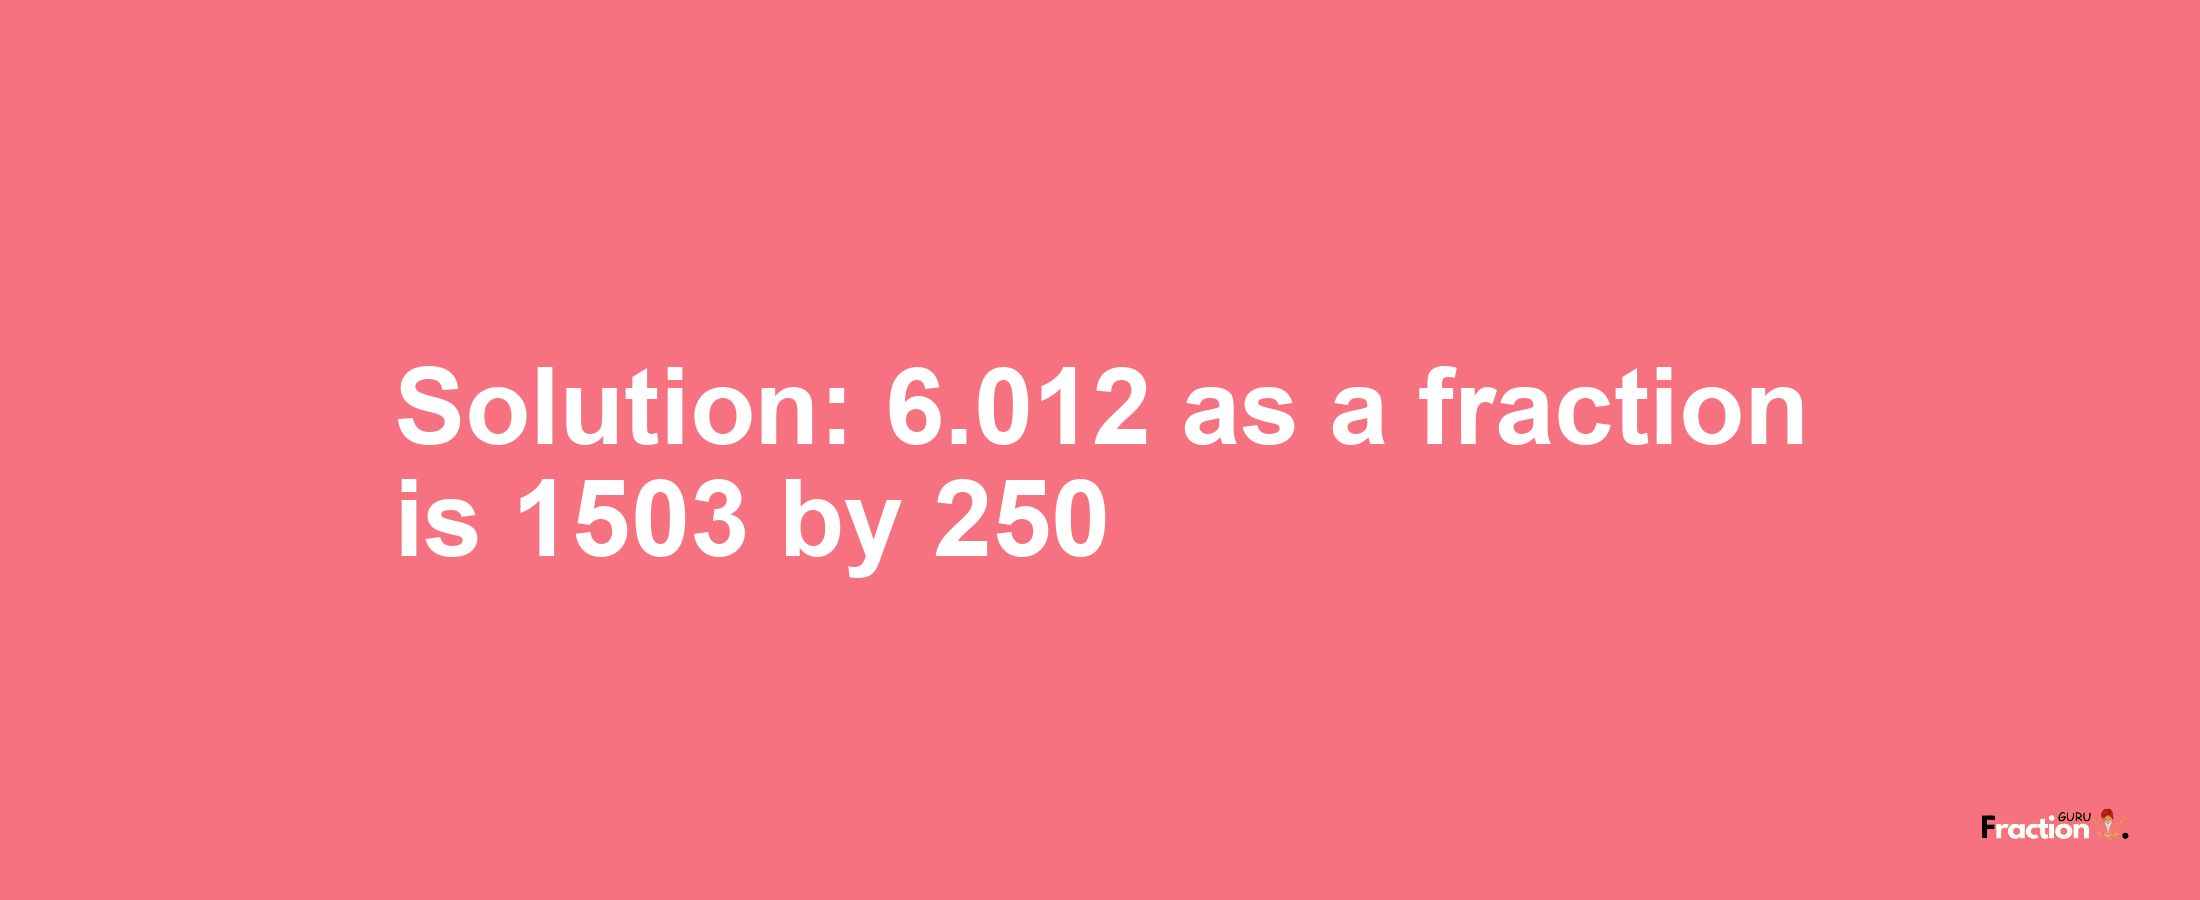 Solution:6.012 as a fraction is 1503/250